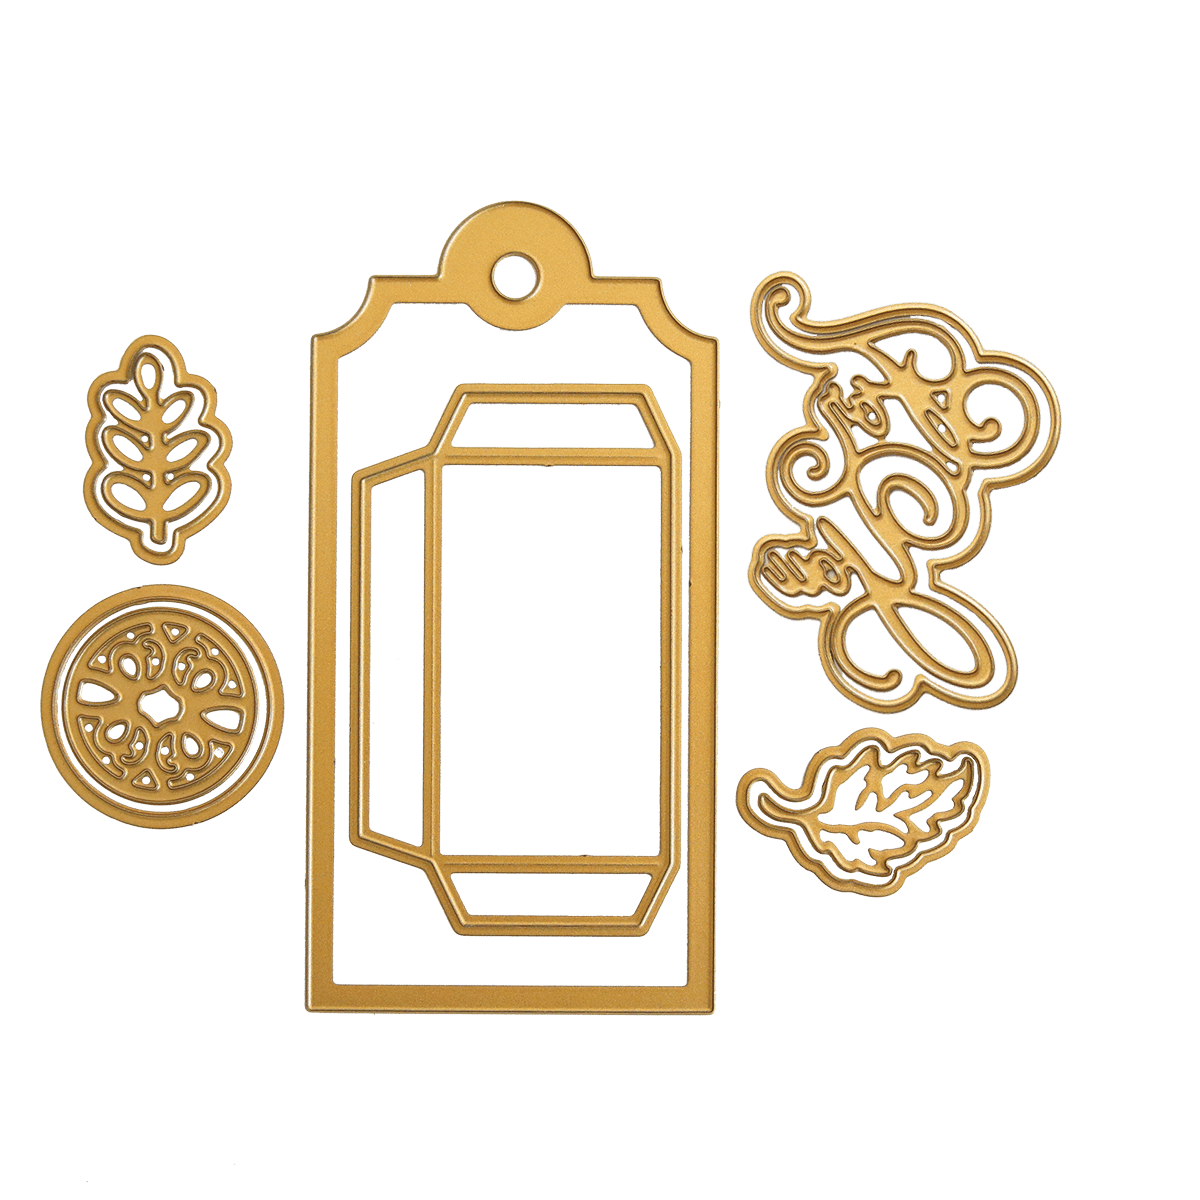 a green background with a gold tag and some decorative items.